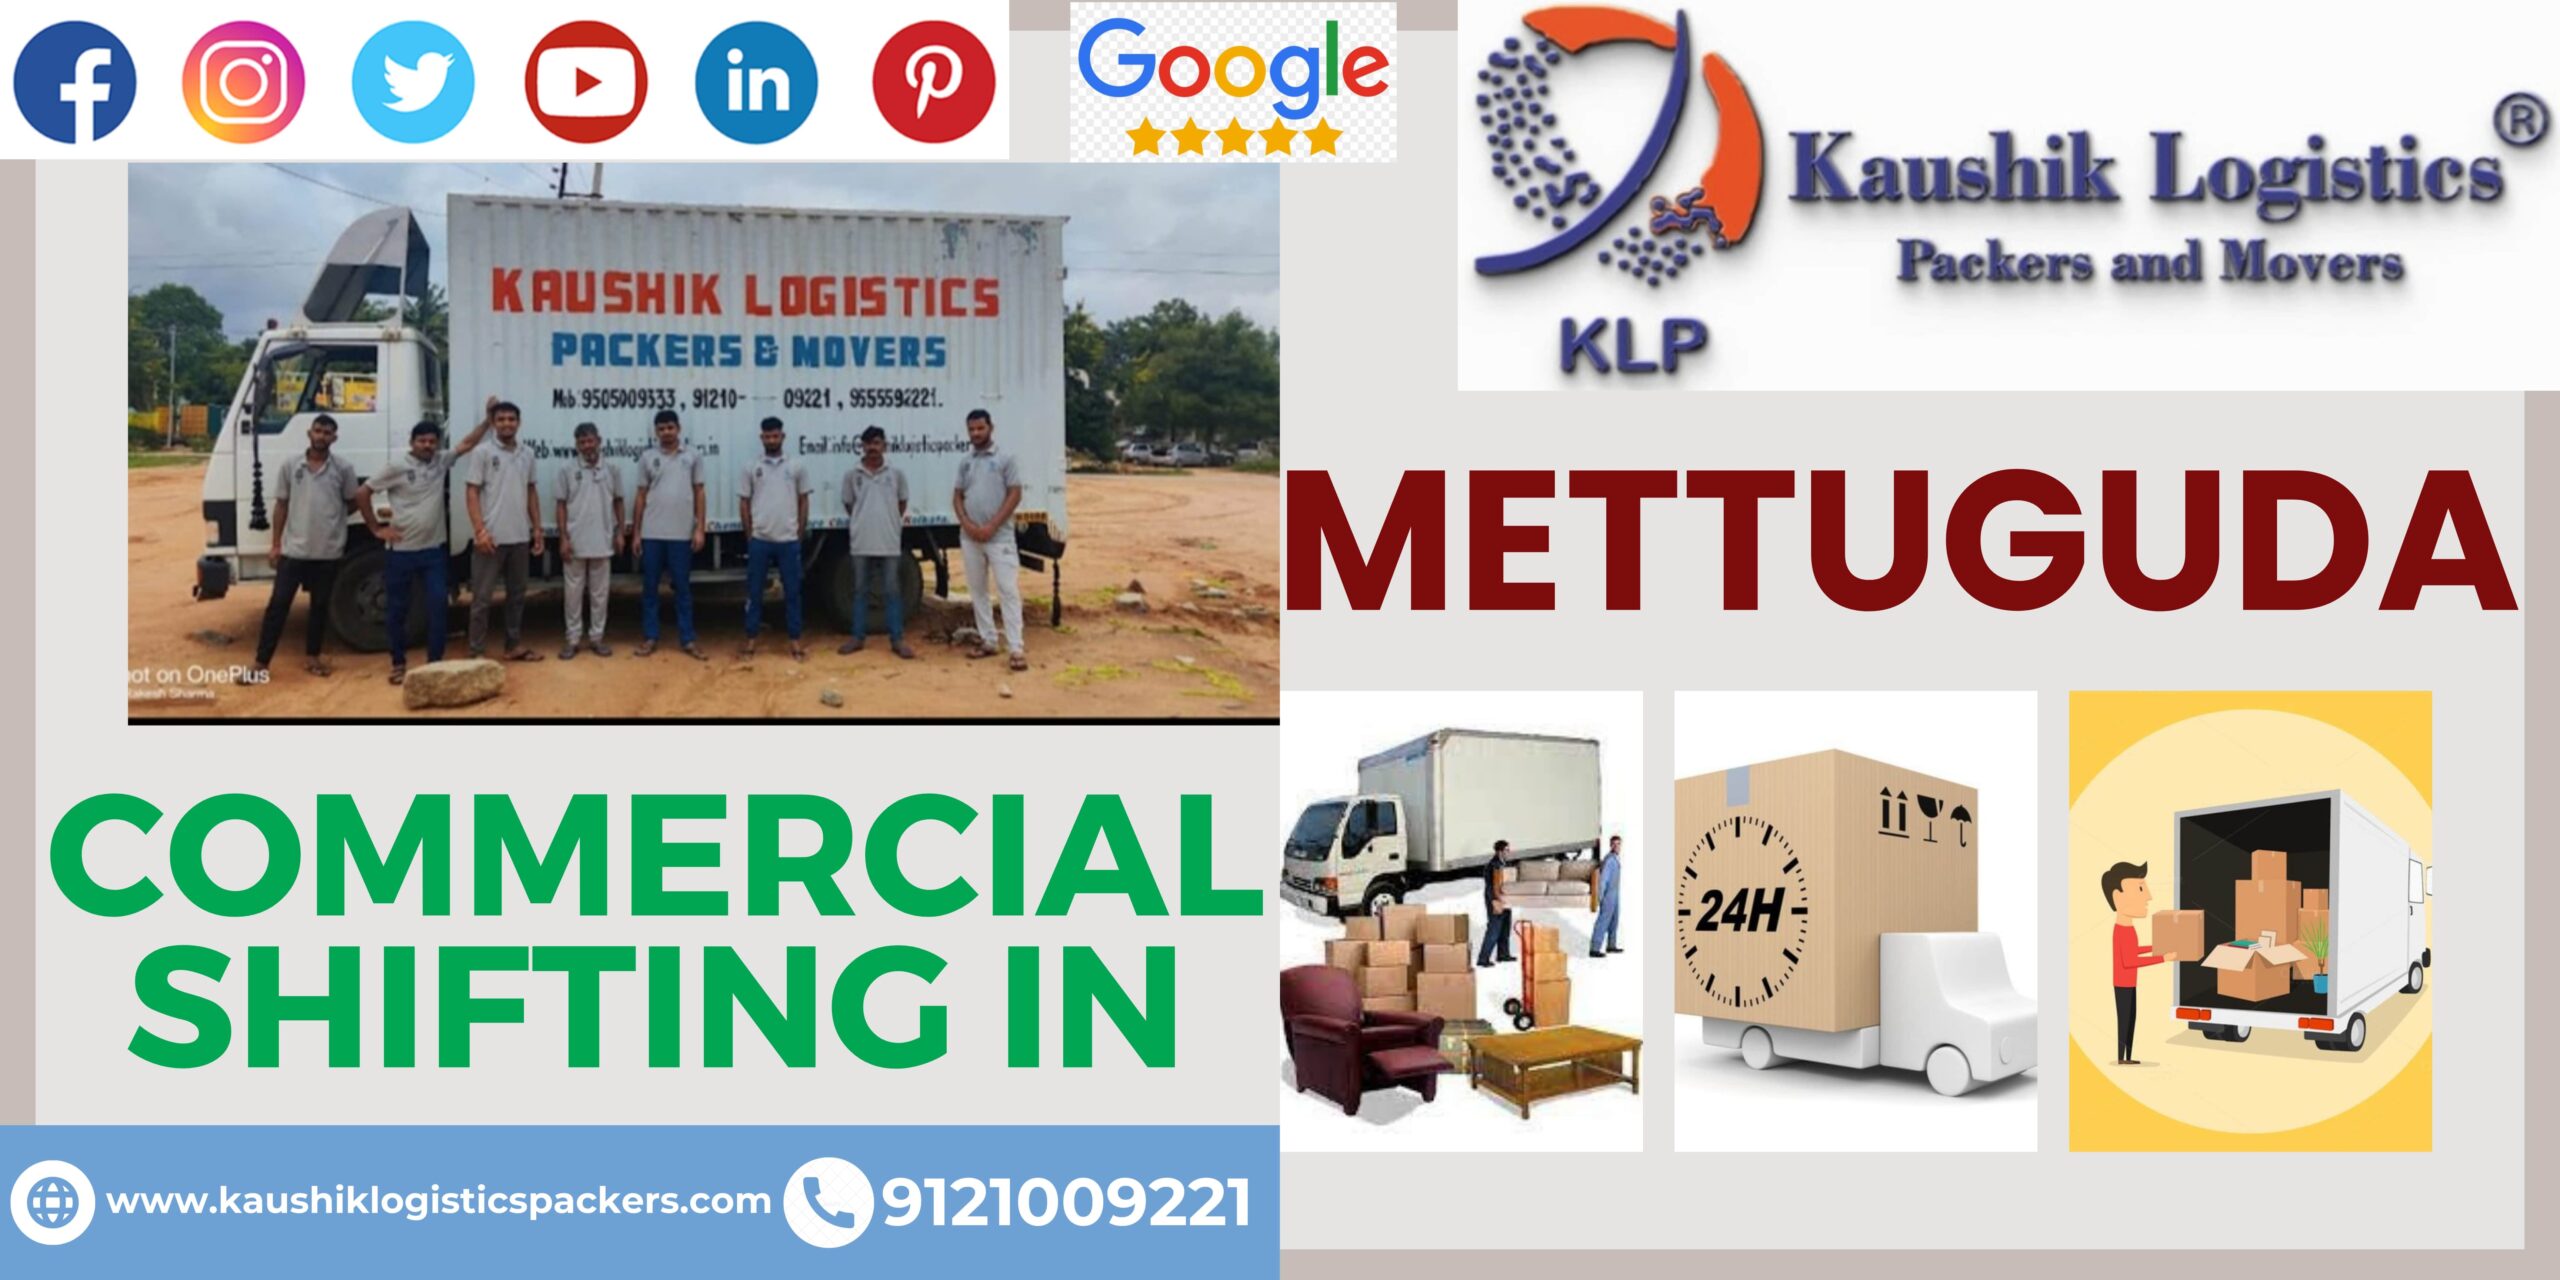 Packers and Movers In Mettuguda